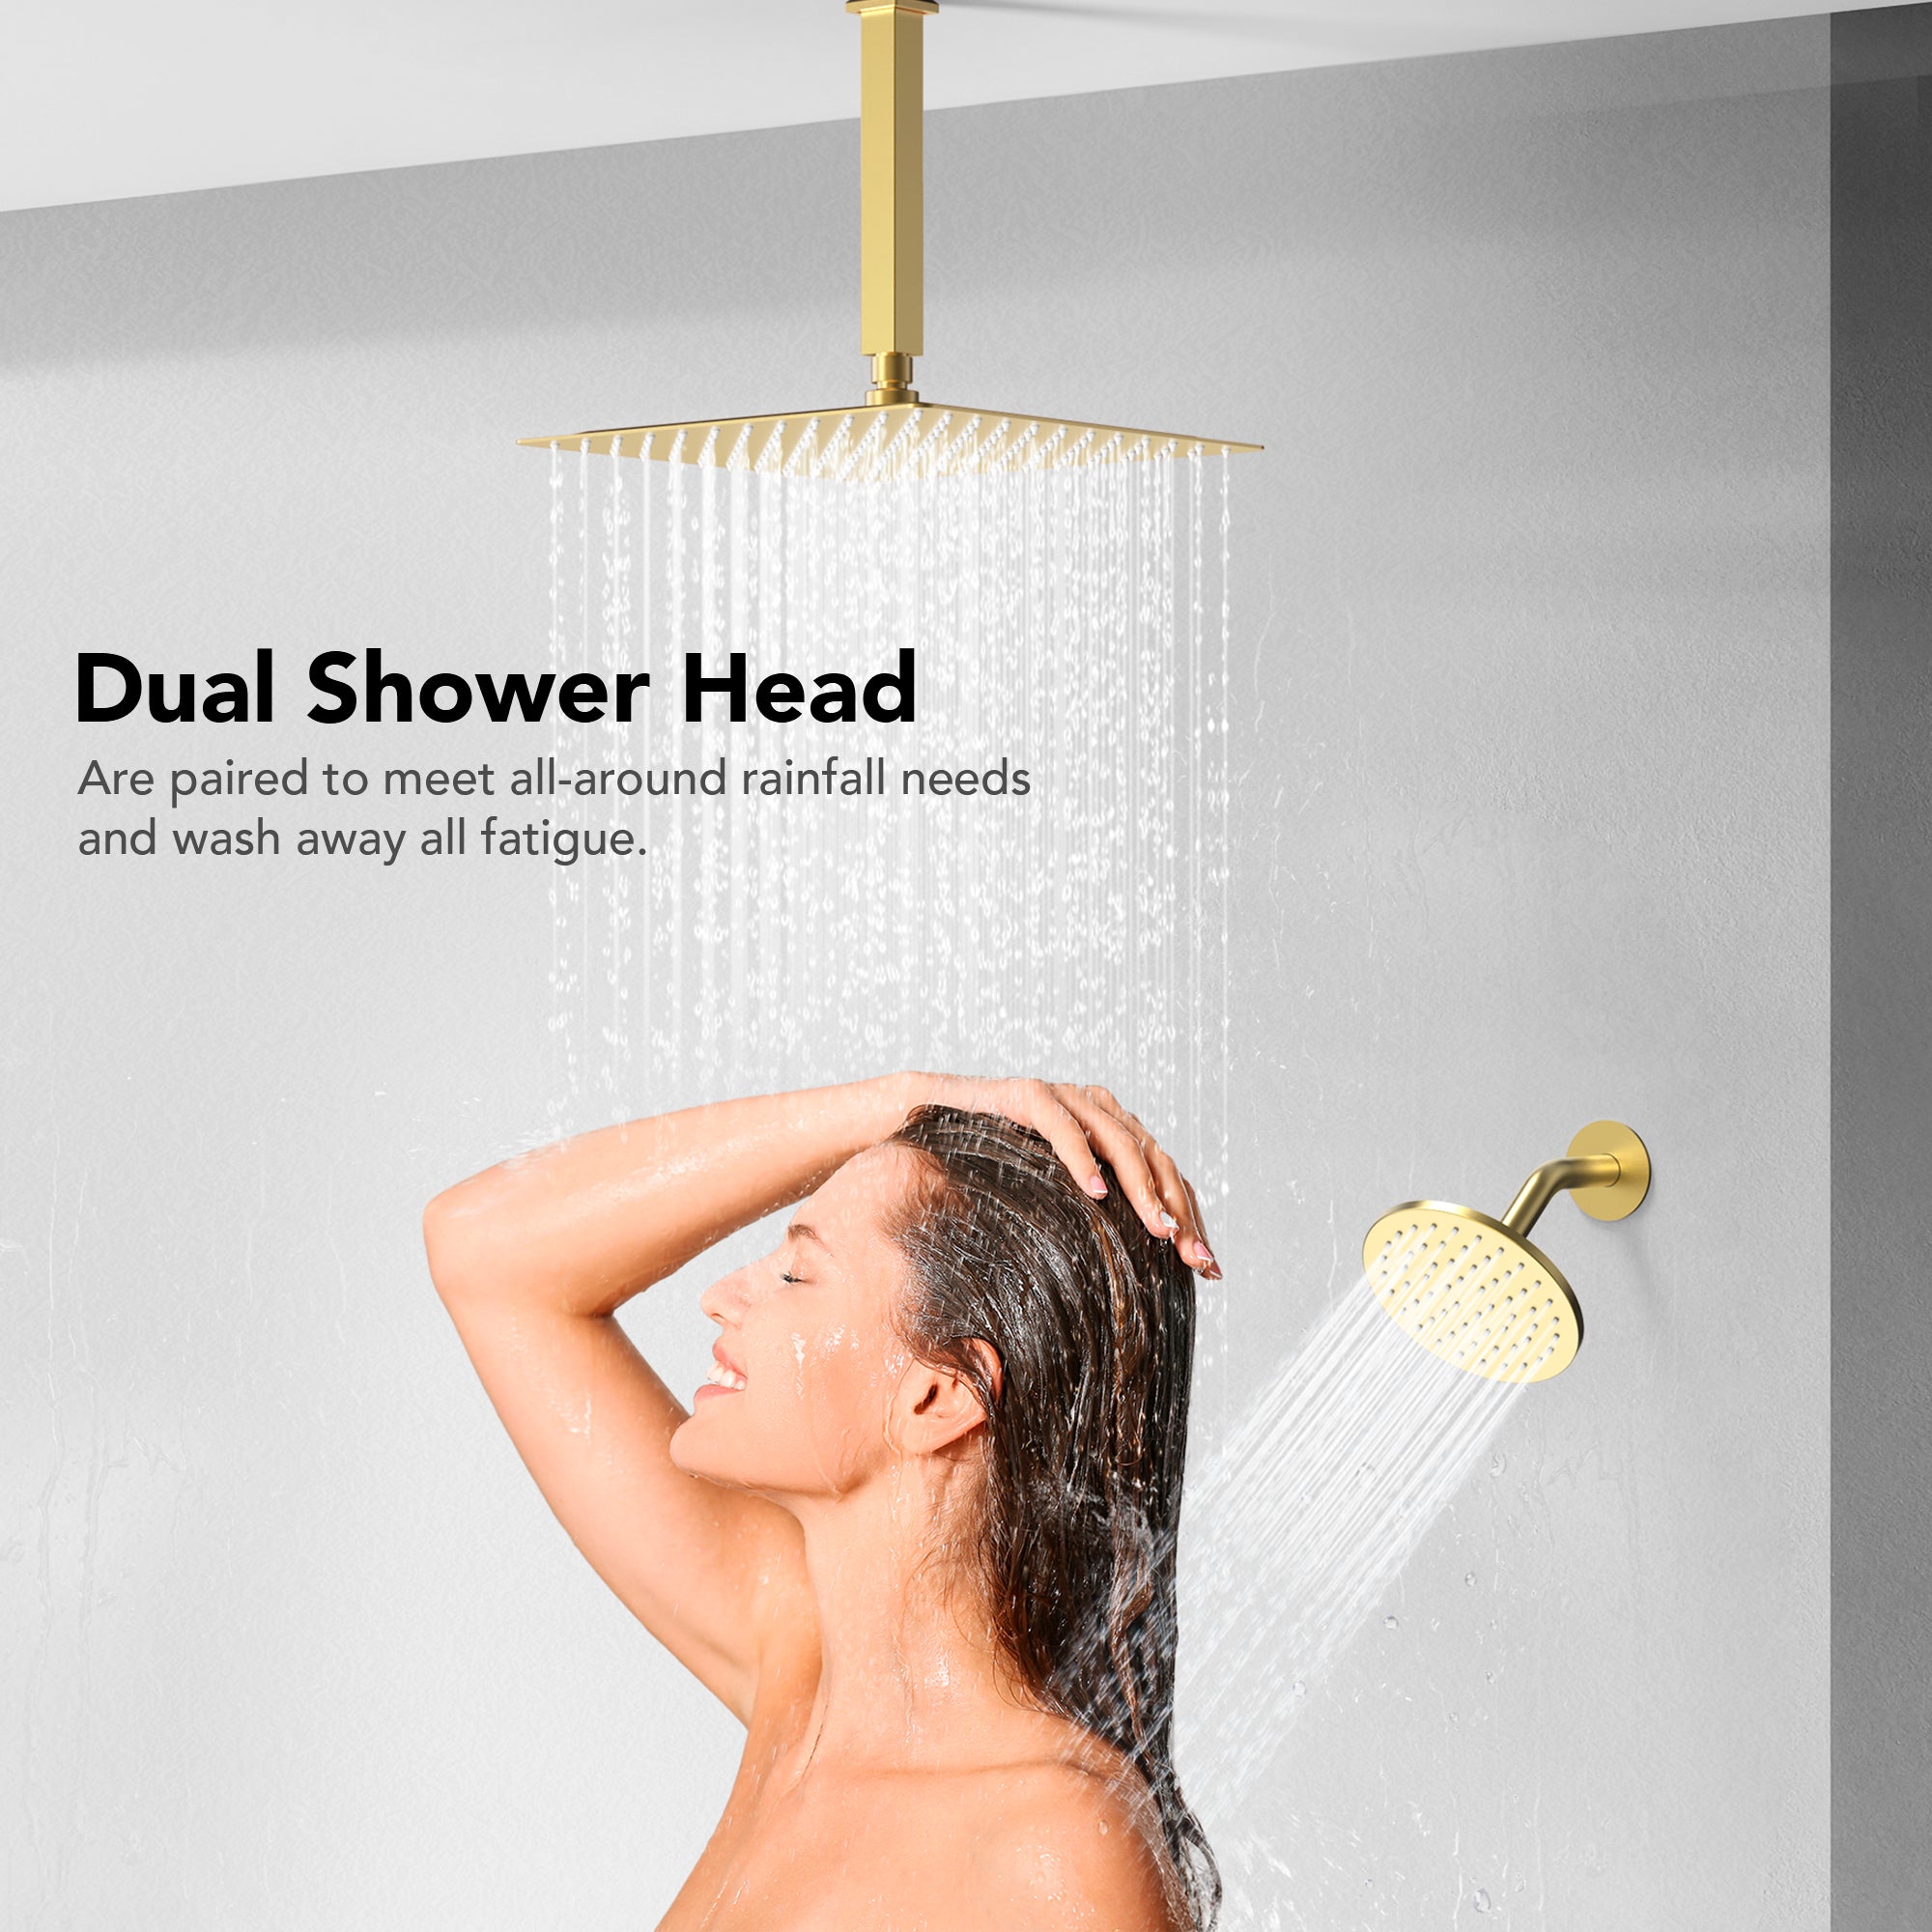 EVERSTEIN SFS-1067-GD12 12" High-Pressure Rainfall Complete Shower System with Rough-in Valve